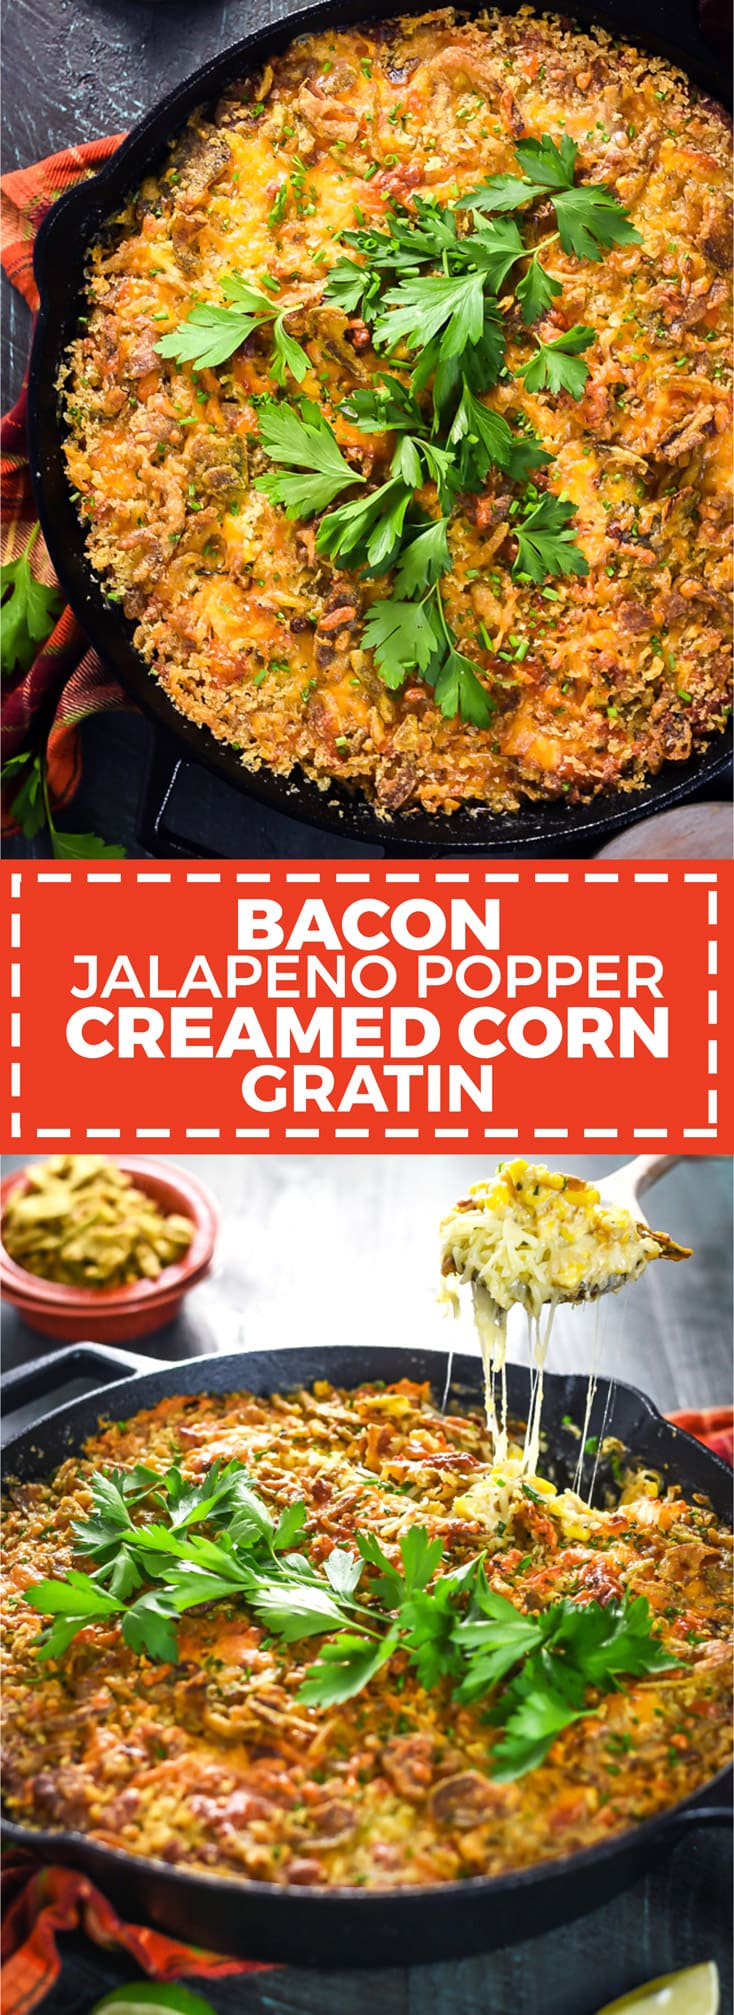 Bacon Jalapeño Popper Creamed Corn Gratin. This cheesy, spicy, creamy, and crispy-topped side dish will steal the show at your Thanksgiving feast. | hostthetoast.com